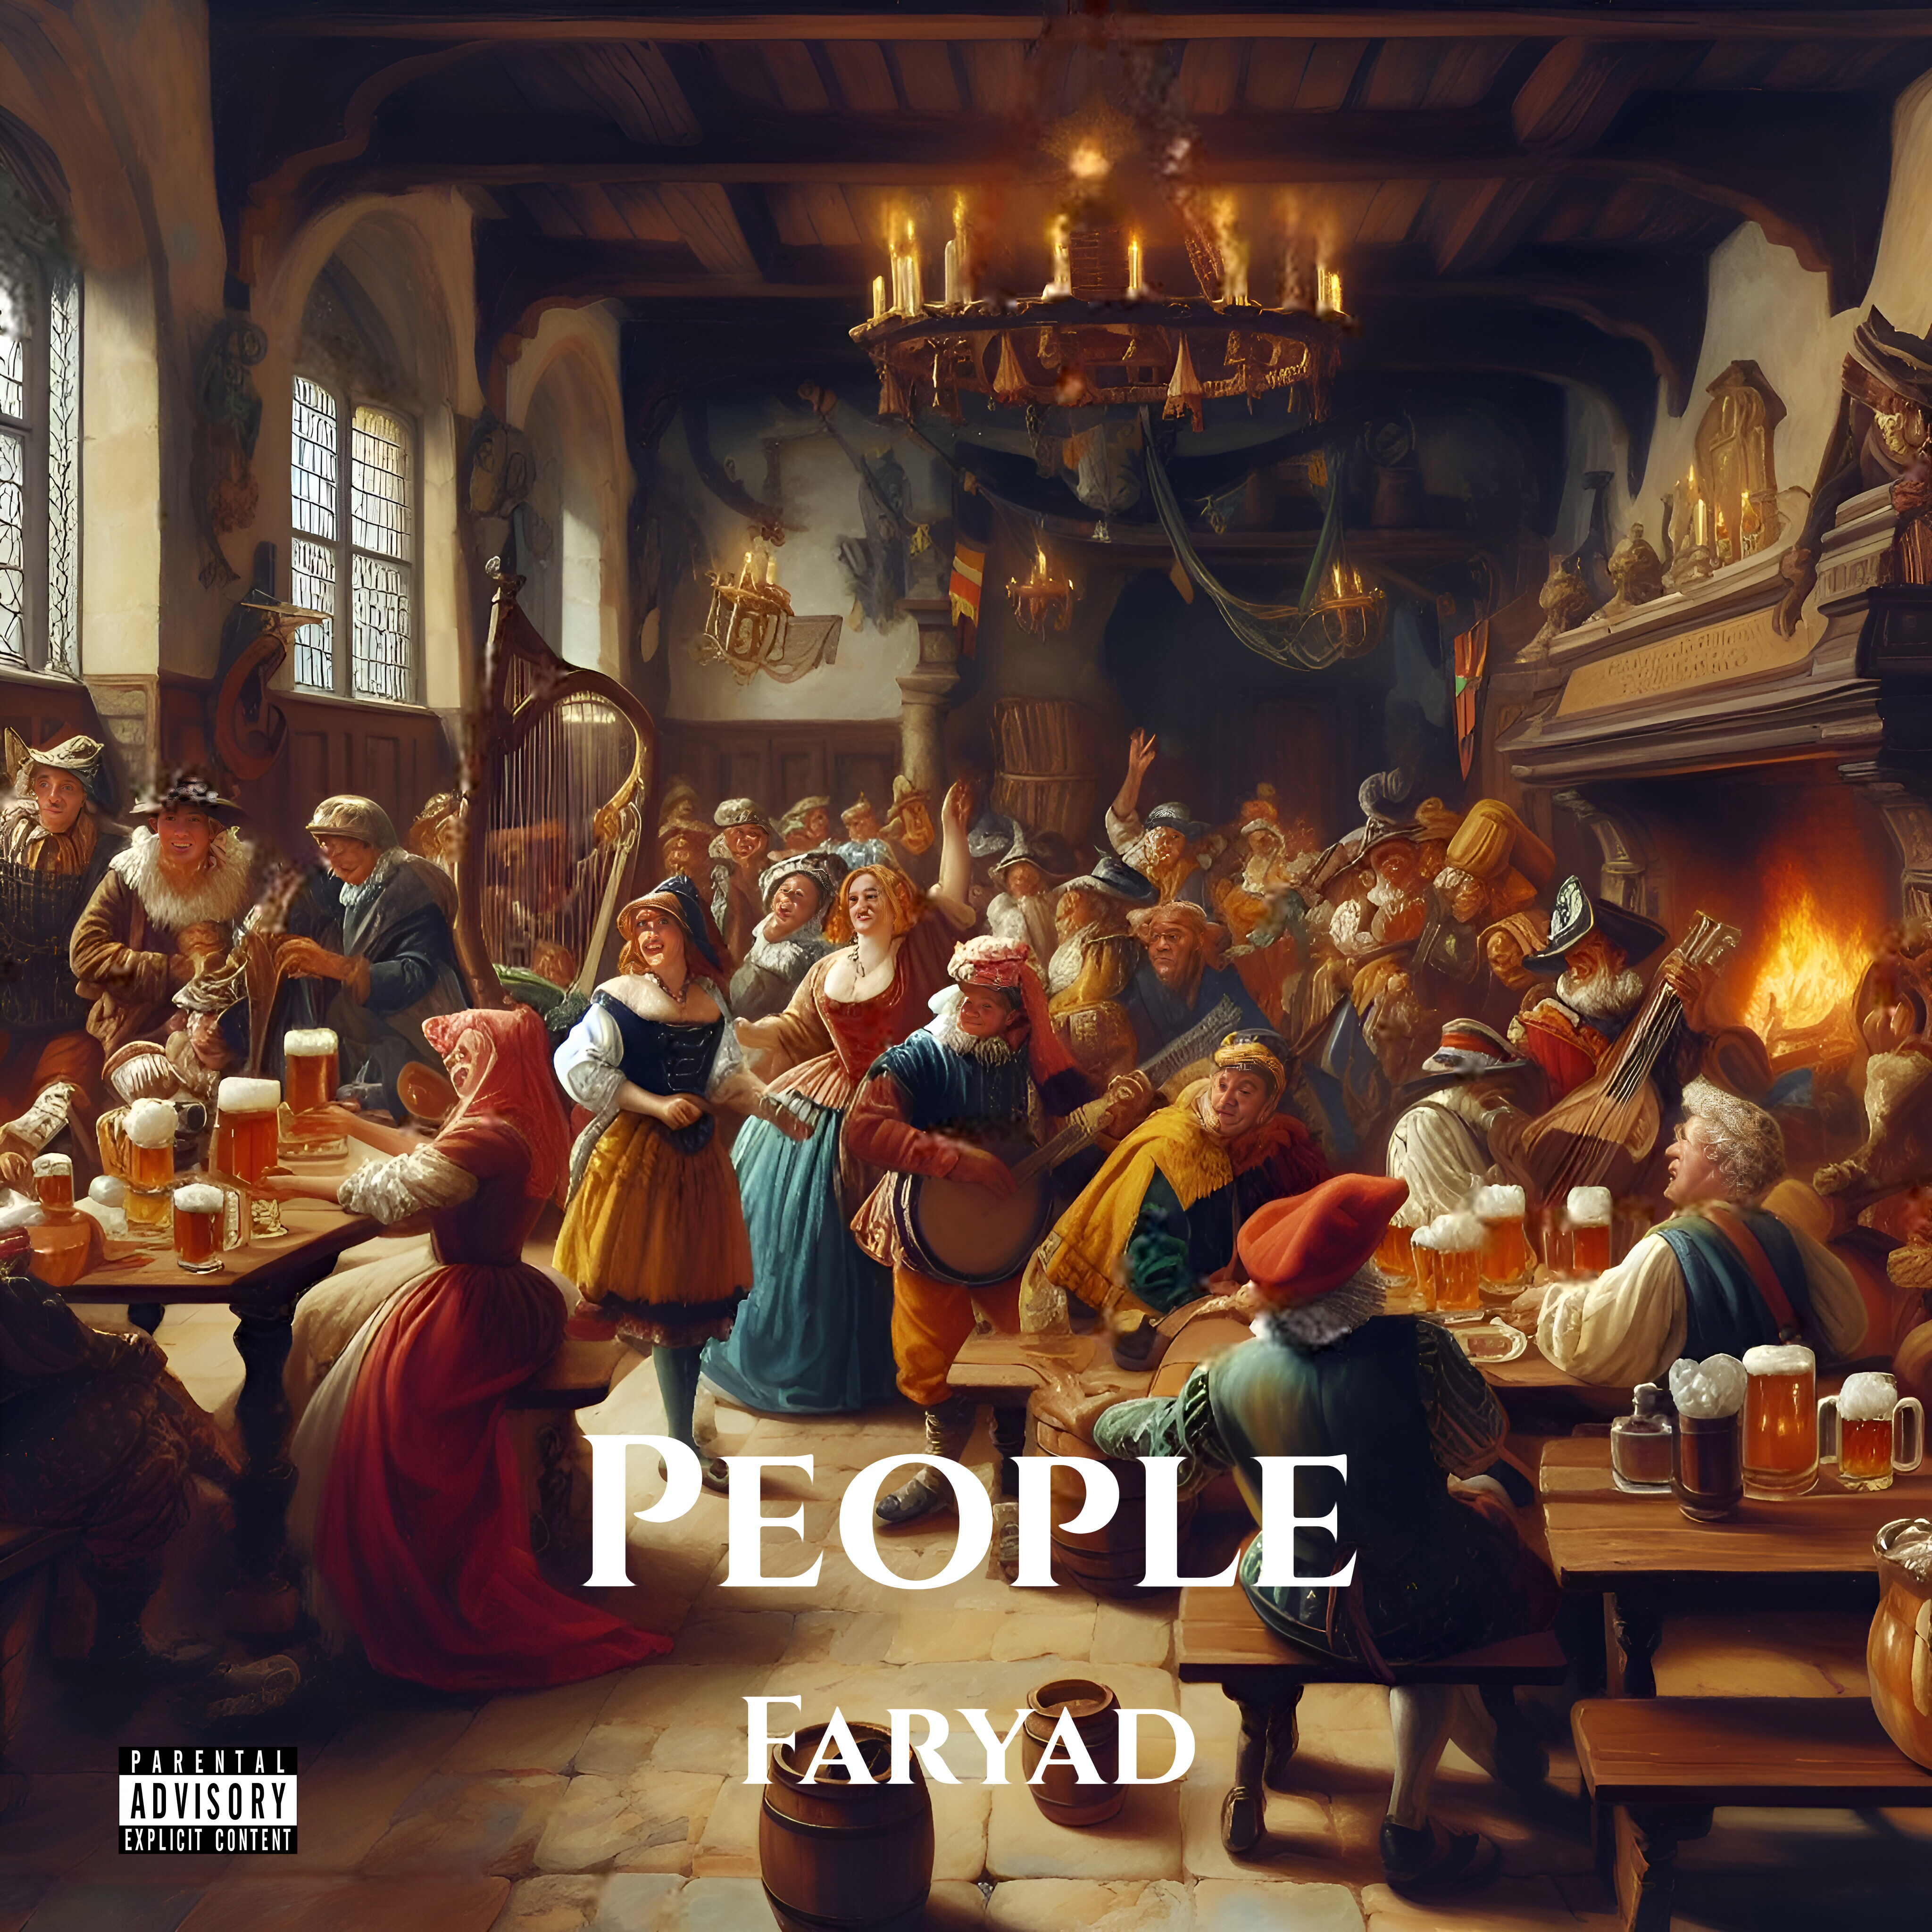 Faryad’s “People”: An Ode to the Intricacies of Human Connections